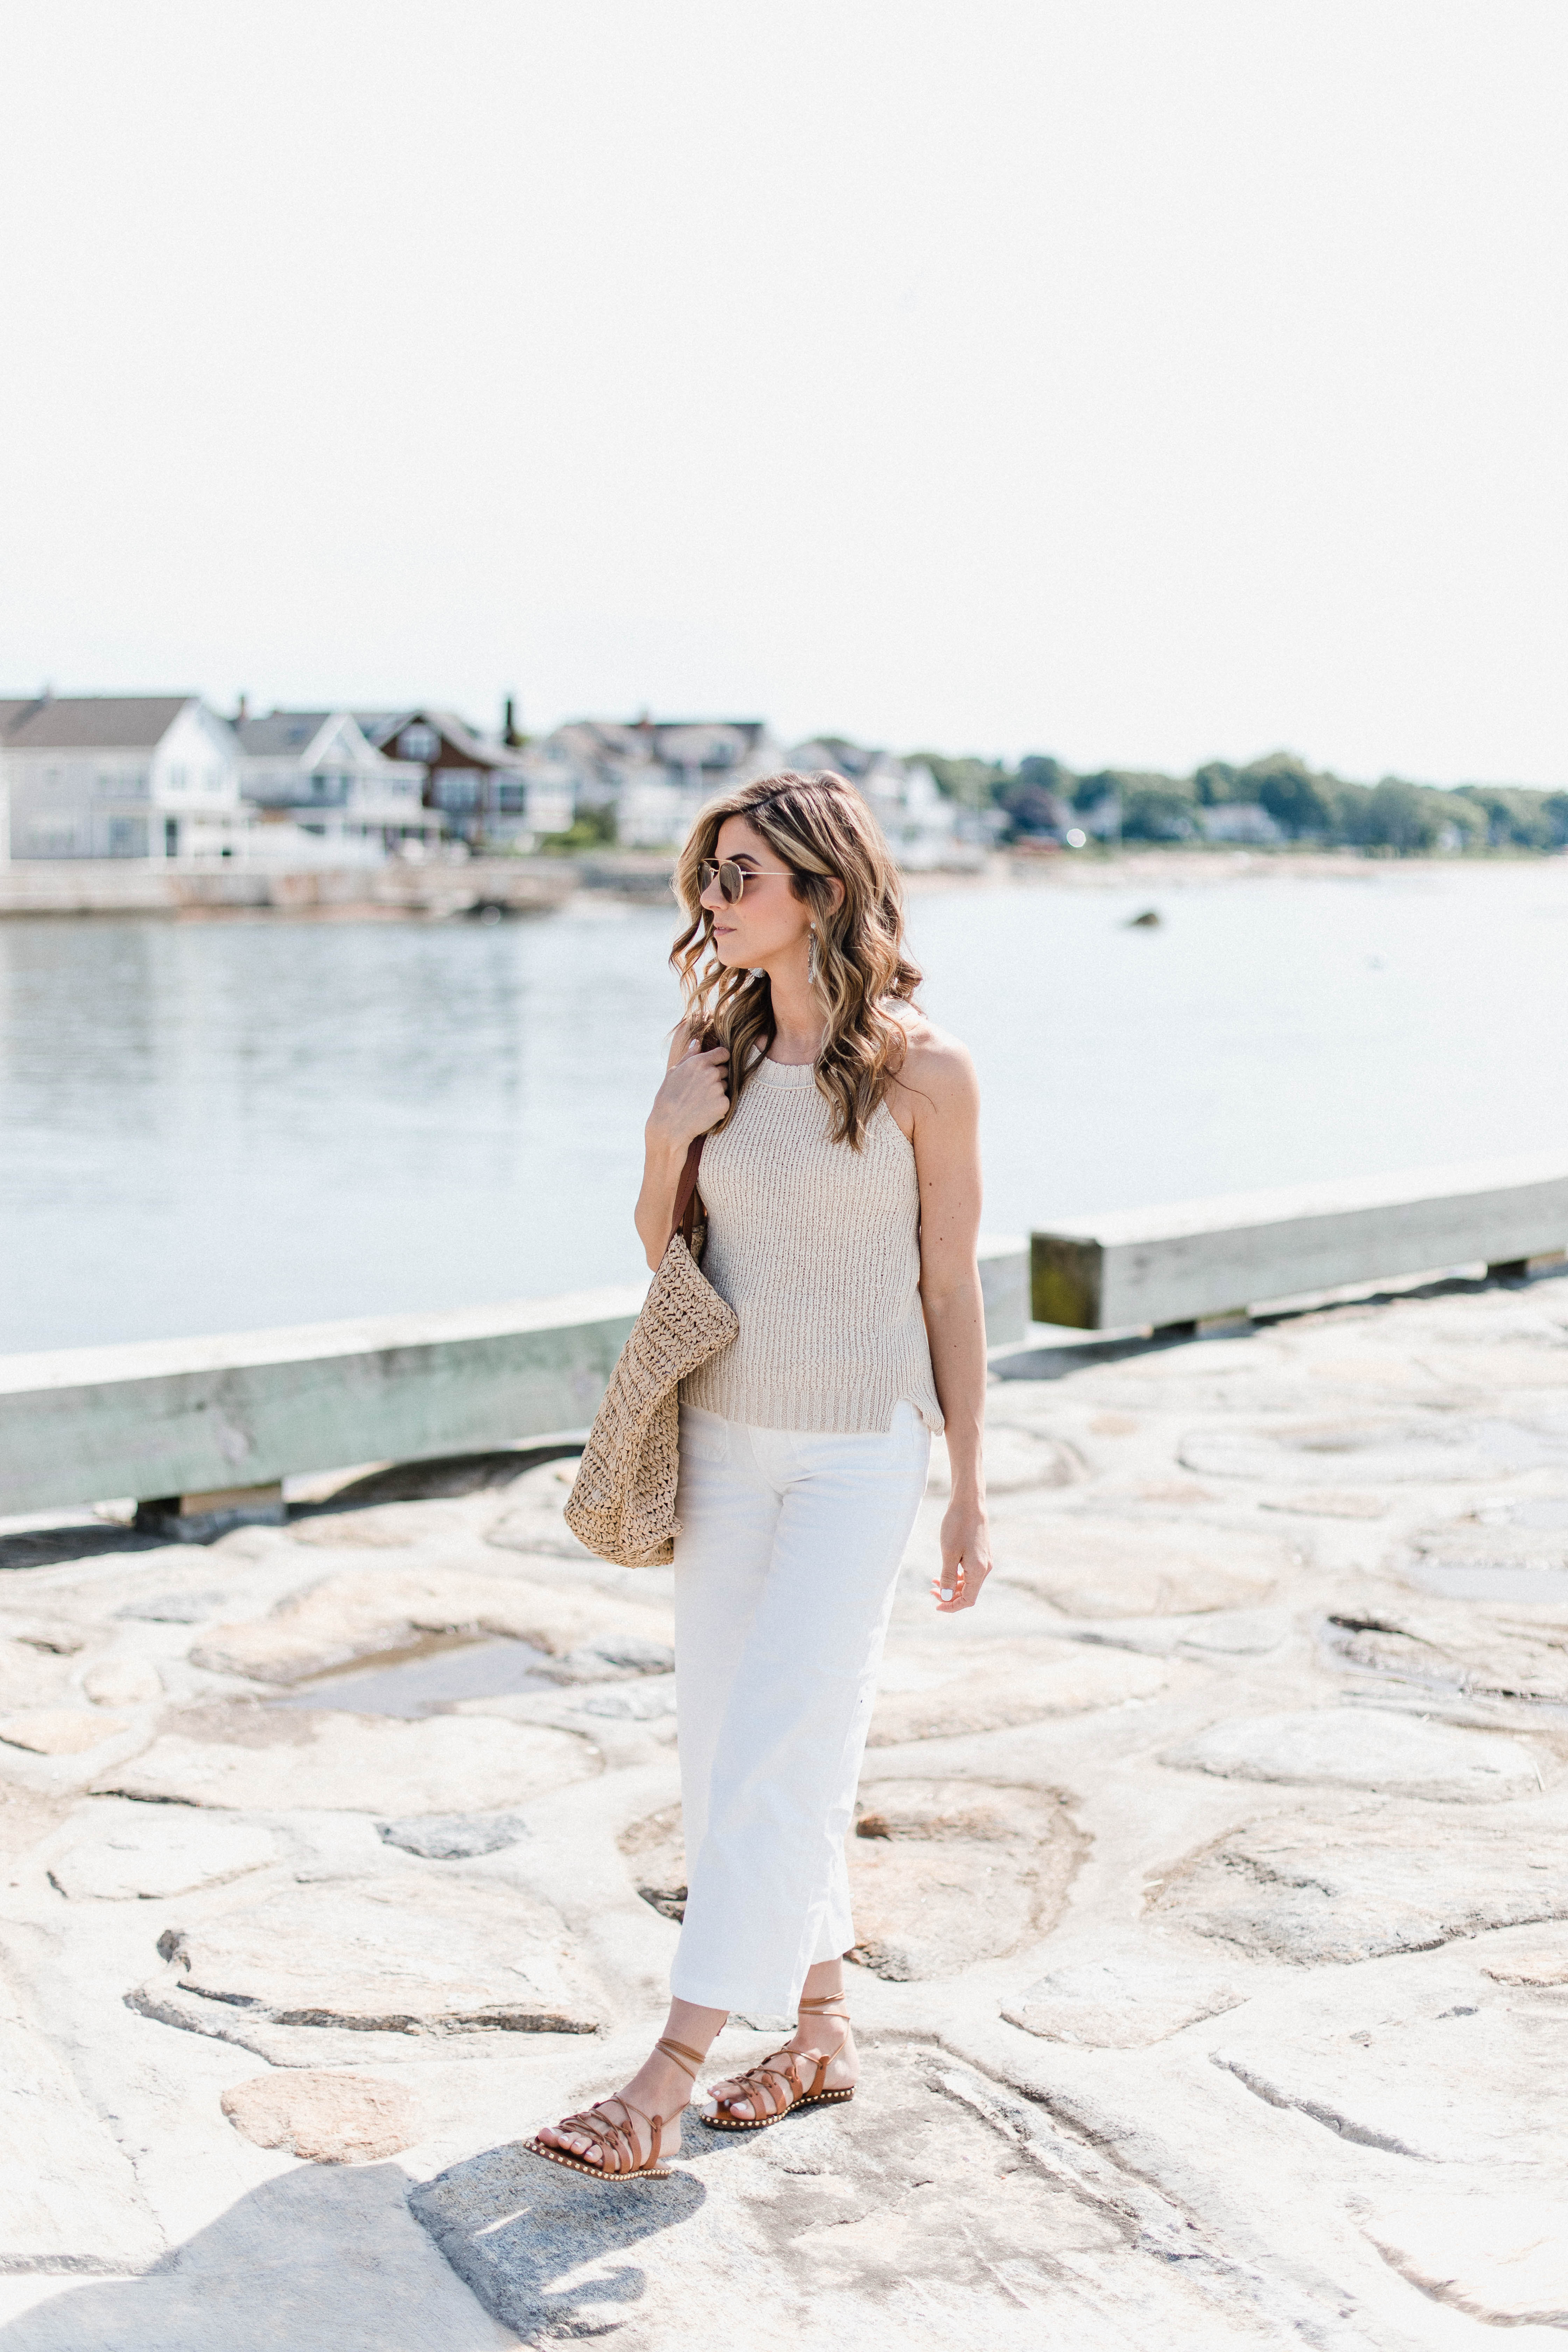 Connecticut life and style blogger Lauren McBride shares Summer Essentials with J.Crew featuring a complete head to toe outfit with versatile wardrobe items.